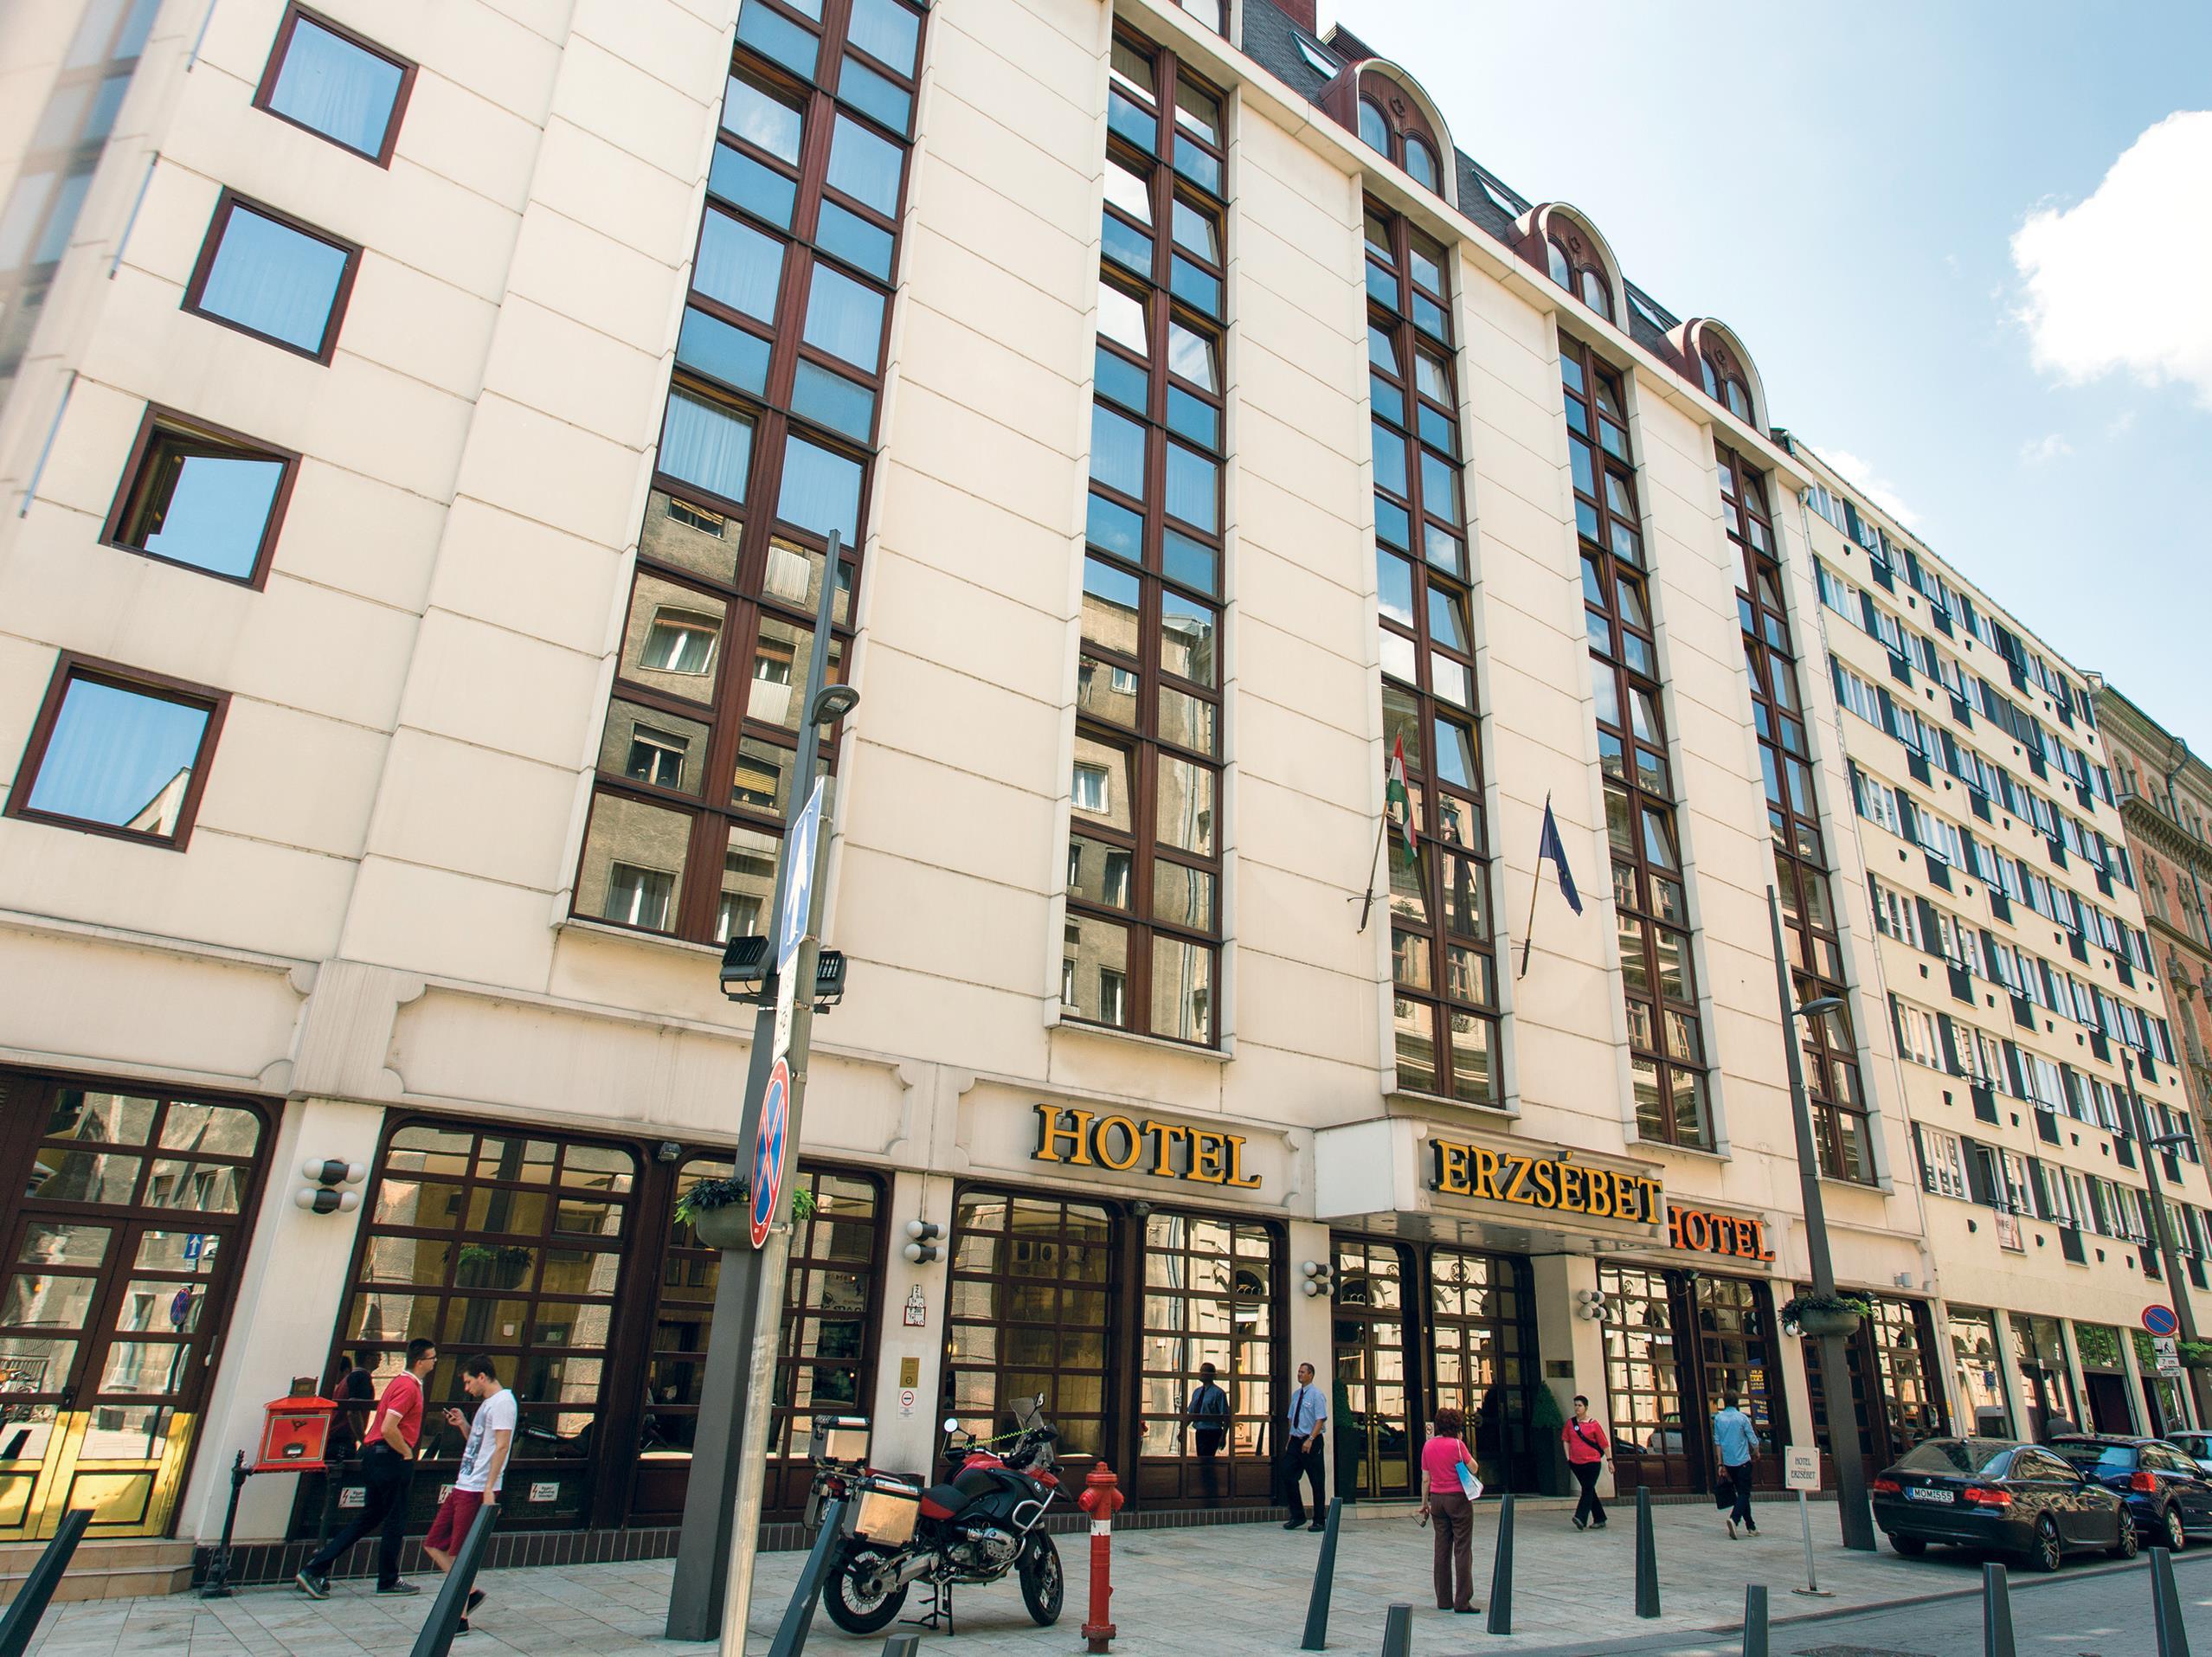 Hotel Erzsebet City Center Booking,Hotel Erzsebet City Center Resort,Hotel Erzsebet City Center reservation,Hotel Erzsebet City Center deals,Hotel Erzsebet City Center Phone Number,Hotel Erzsebet City Center website,Hotel Erzsebet City Center E-mail,Hotel Erzsebet City Center address,Hotel Erzsebet City Center Overview,Rooms & Rates,Hotel Erzsebet City Center Photos,Hotel Erzsebet City Center Location Amenities,Hotel Erzsebet City Center Q&A,Hotel Erzsebet City Center Map,Hotel Erzsebet City Center Gallery,Hotel Erzsebet City Center Budapest 2018, Budapest Hotel Erzsebet City Center room types 2018, Budapest Hotel Erzsebet City Center price 2018, Hotel Erzsebet City Center in Budapest 2018, Budapest Hotel Erzsebet City Center address, Hotel Erzsebet City Center Budapest booking online, Budapest Hotel Erzsebet City Center travel services, Budapest Hotel Erzsebet City Center pick up services.